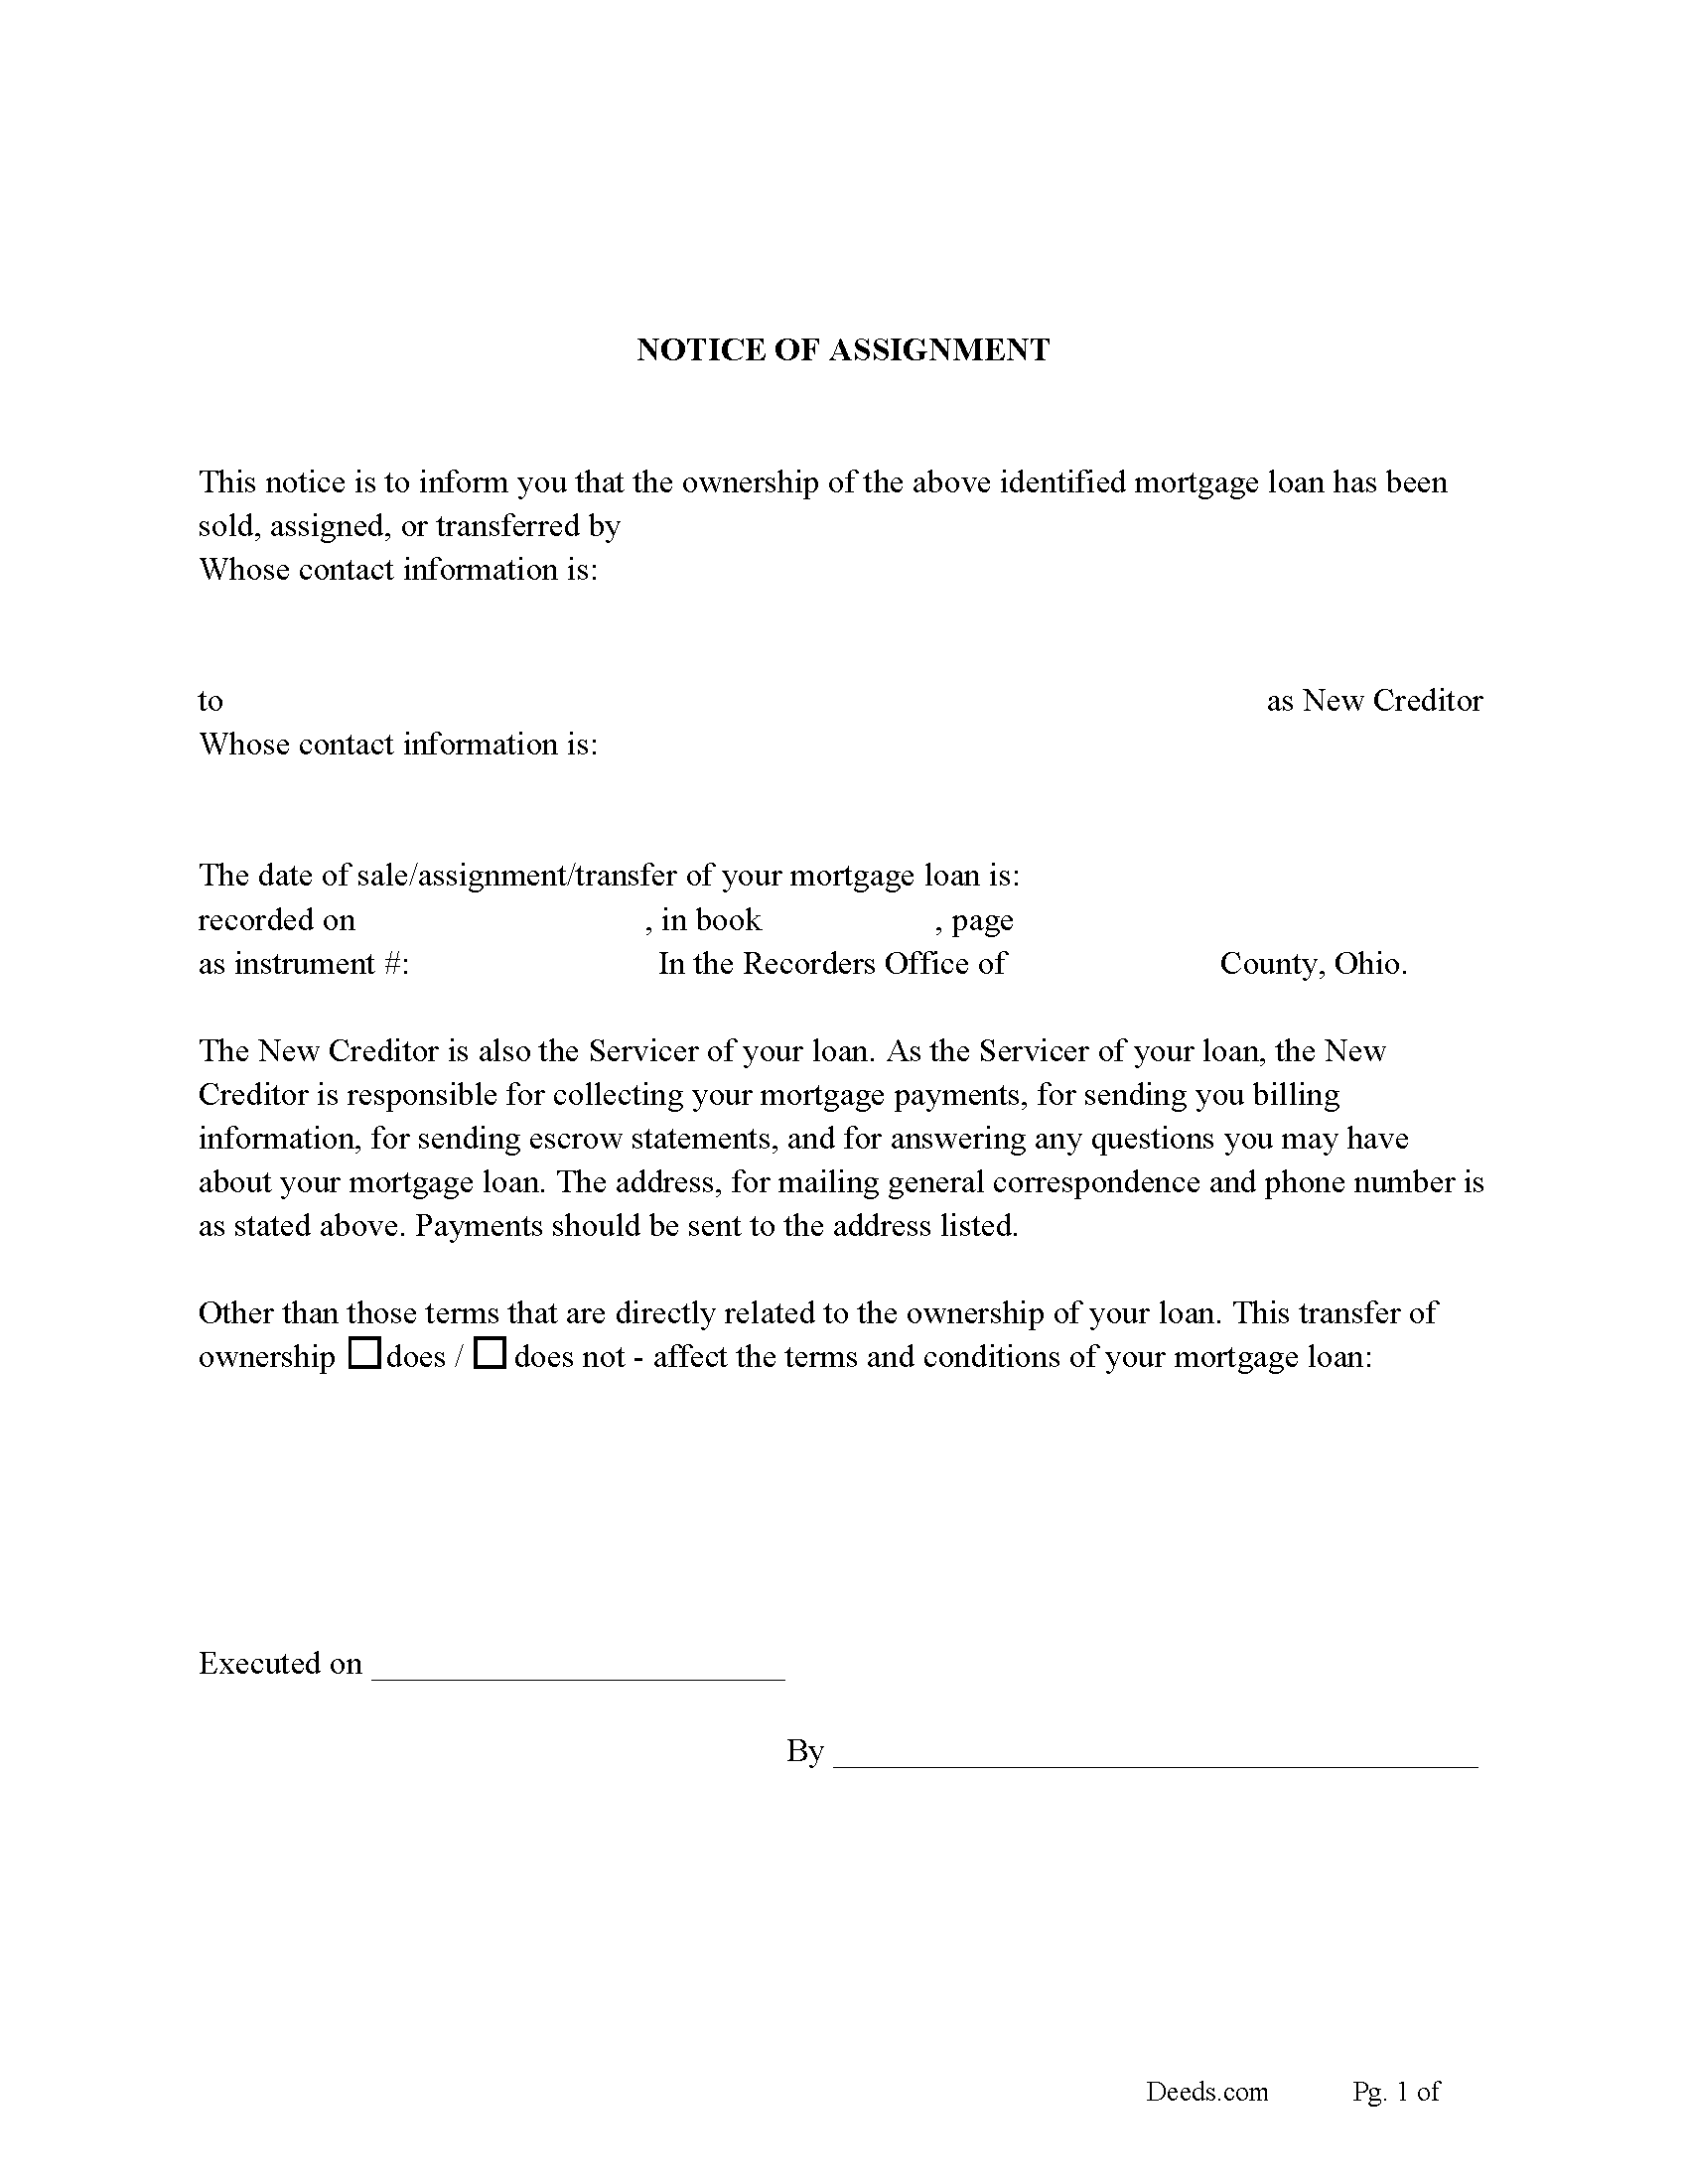 Notice of Assignment of Mortgage Form